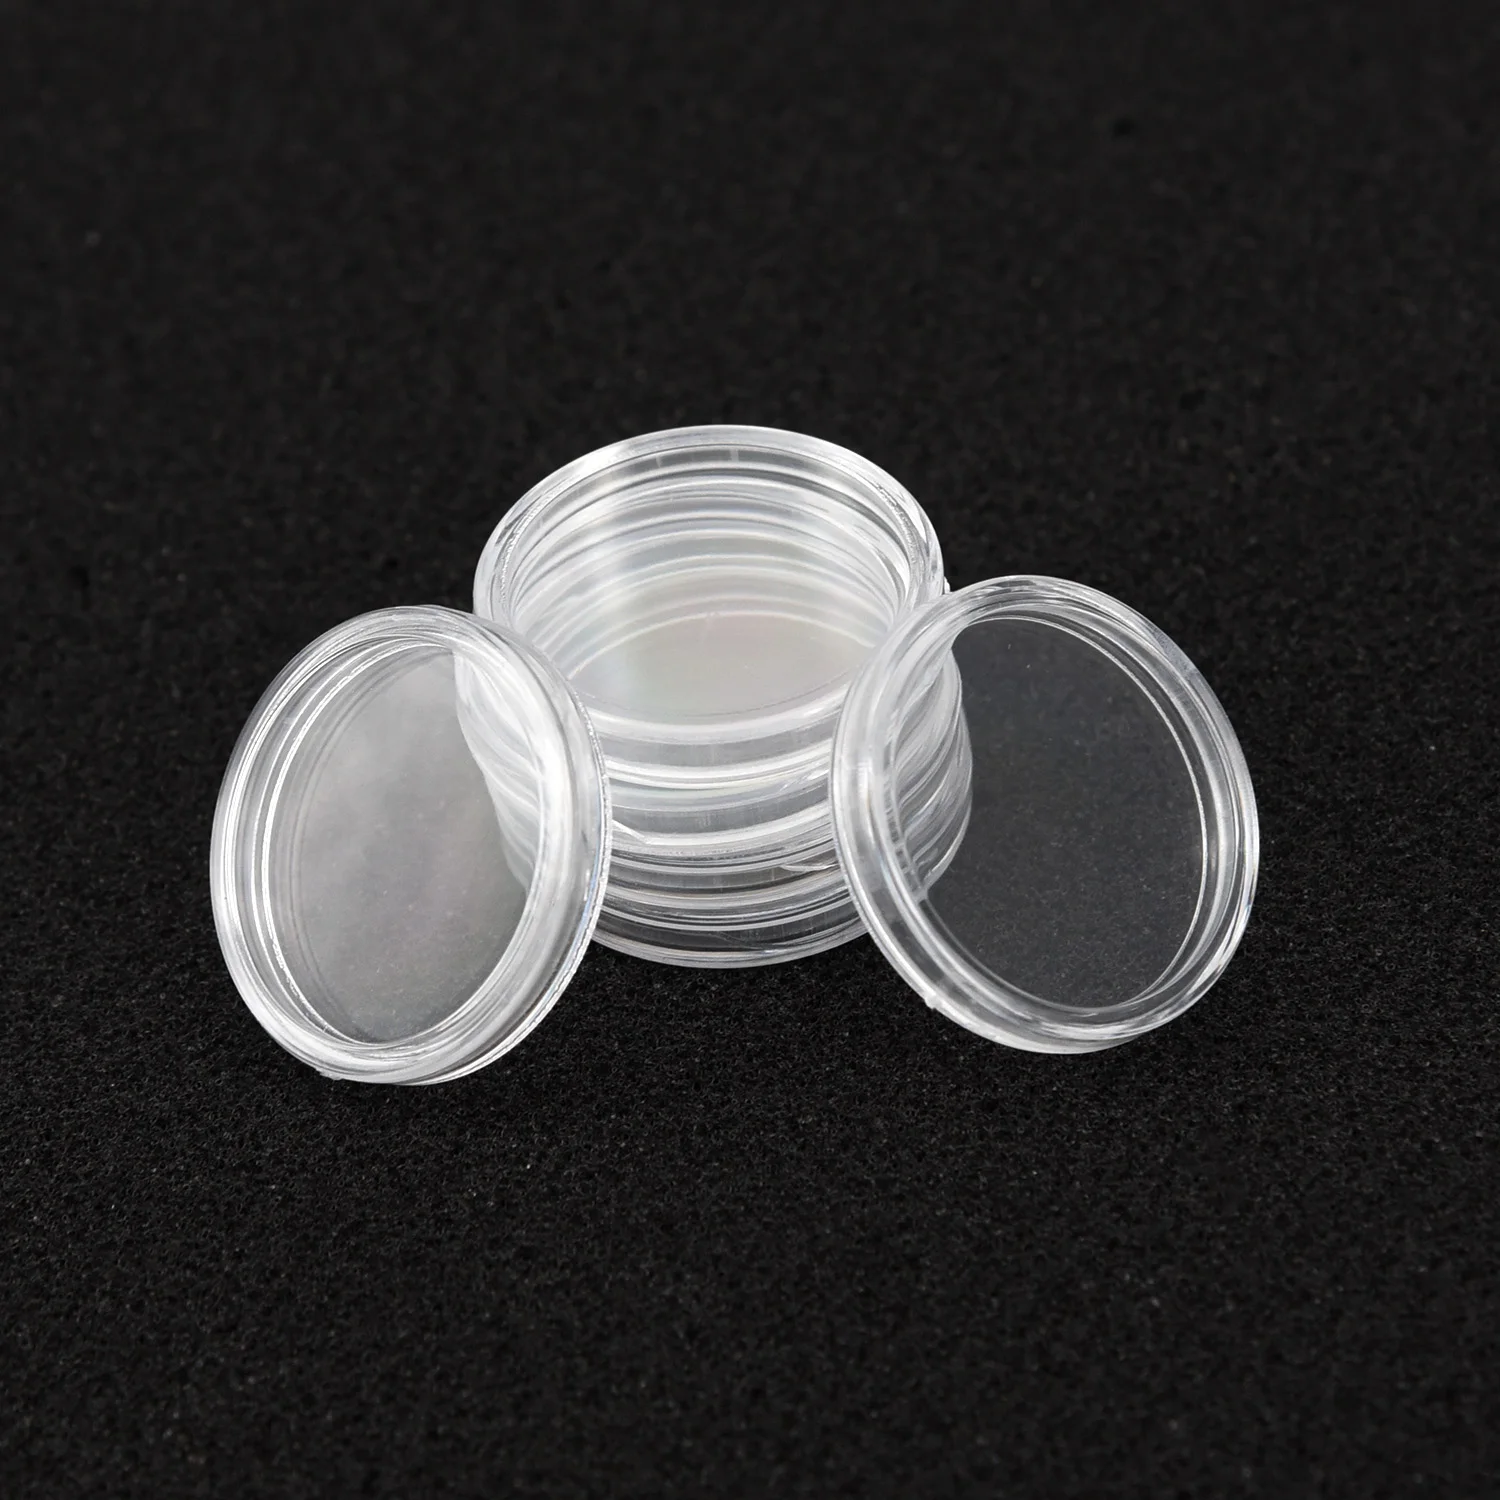 100Pcs 16/18/20/21/23/25/26/28/30mm Round Coin Holder Capsule Protector Box For Coin Collection Case Storage Box Organizer